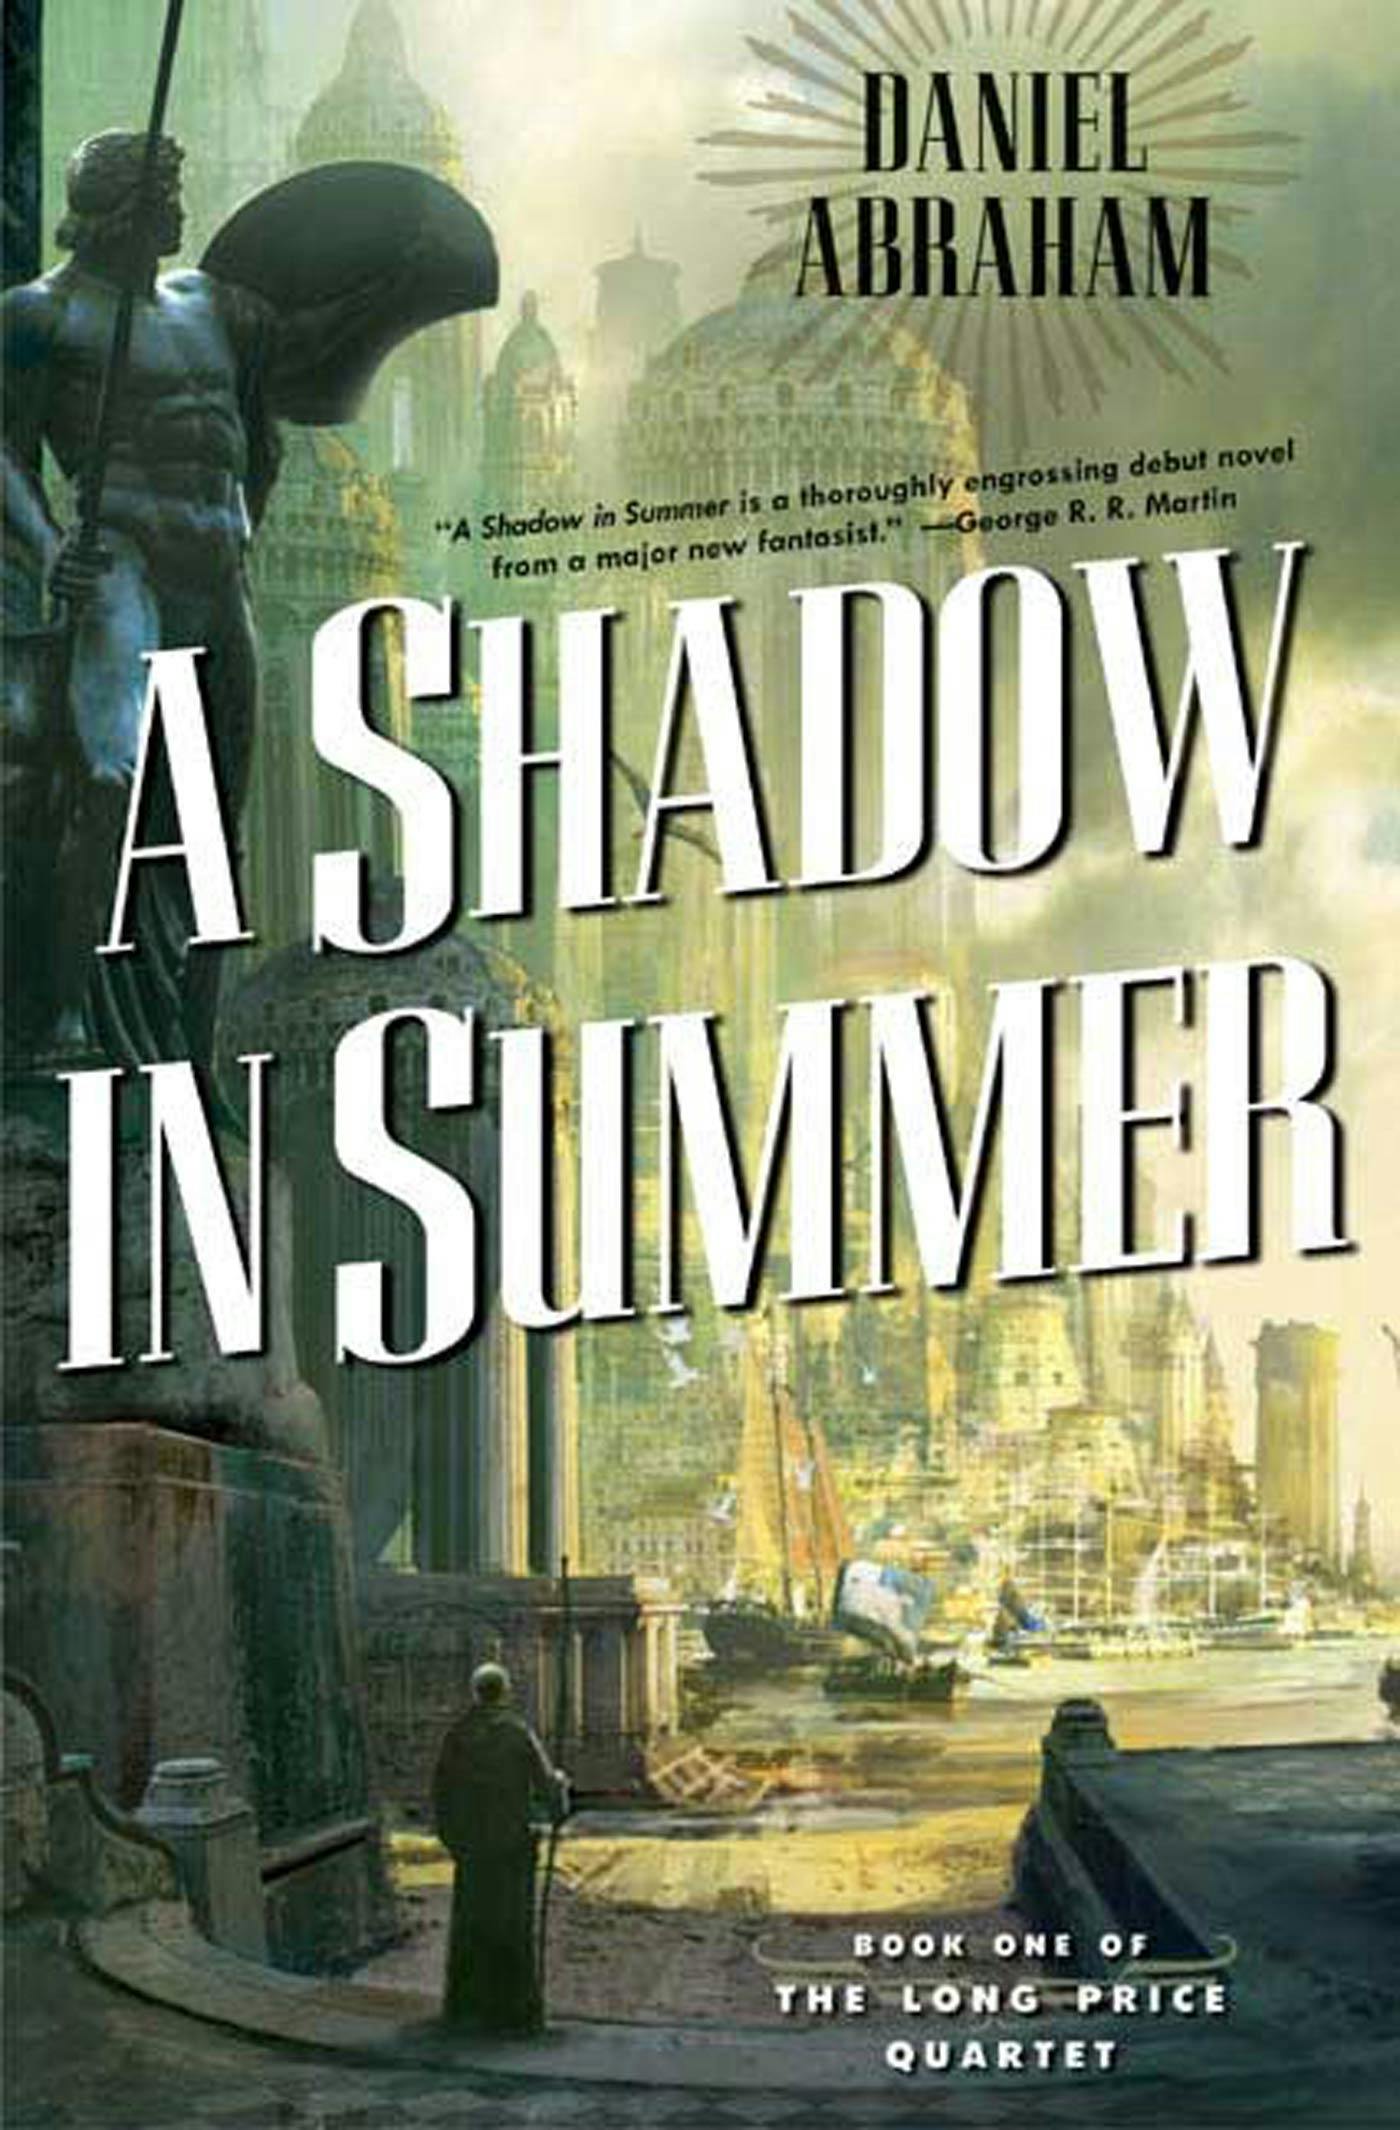 Cover for the book titled as: A Shadow in Summer